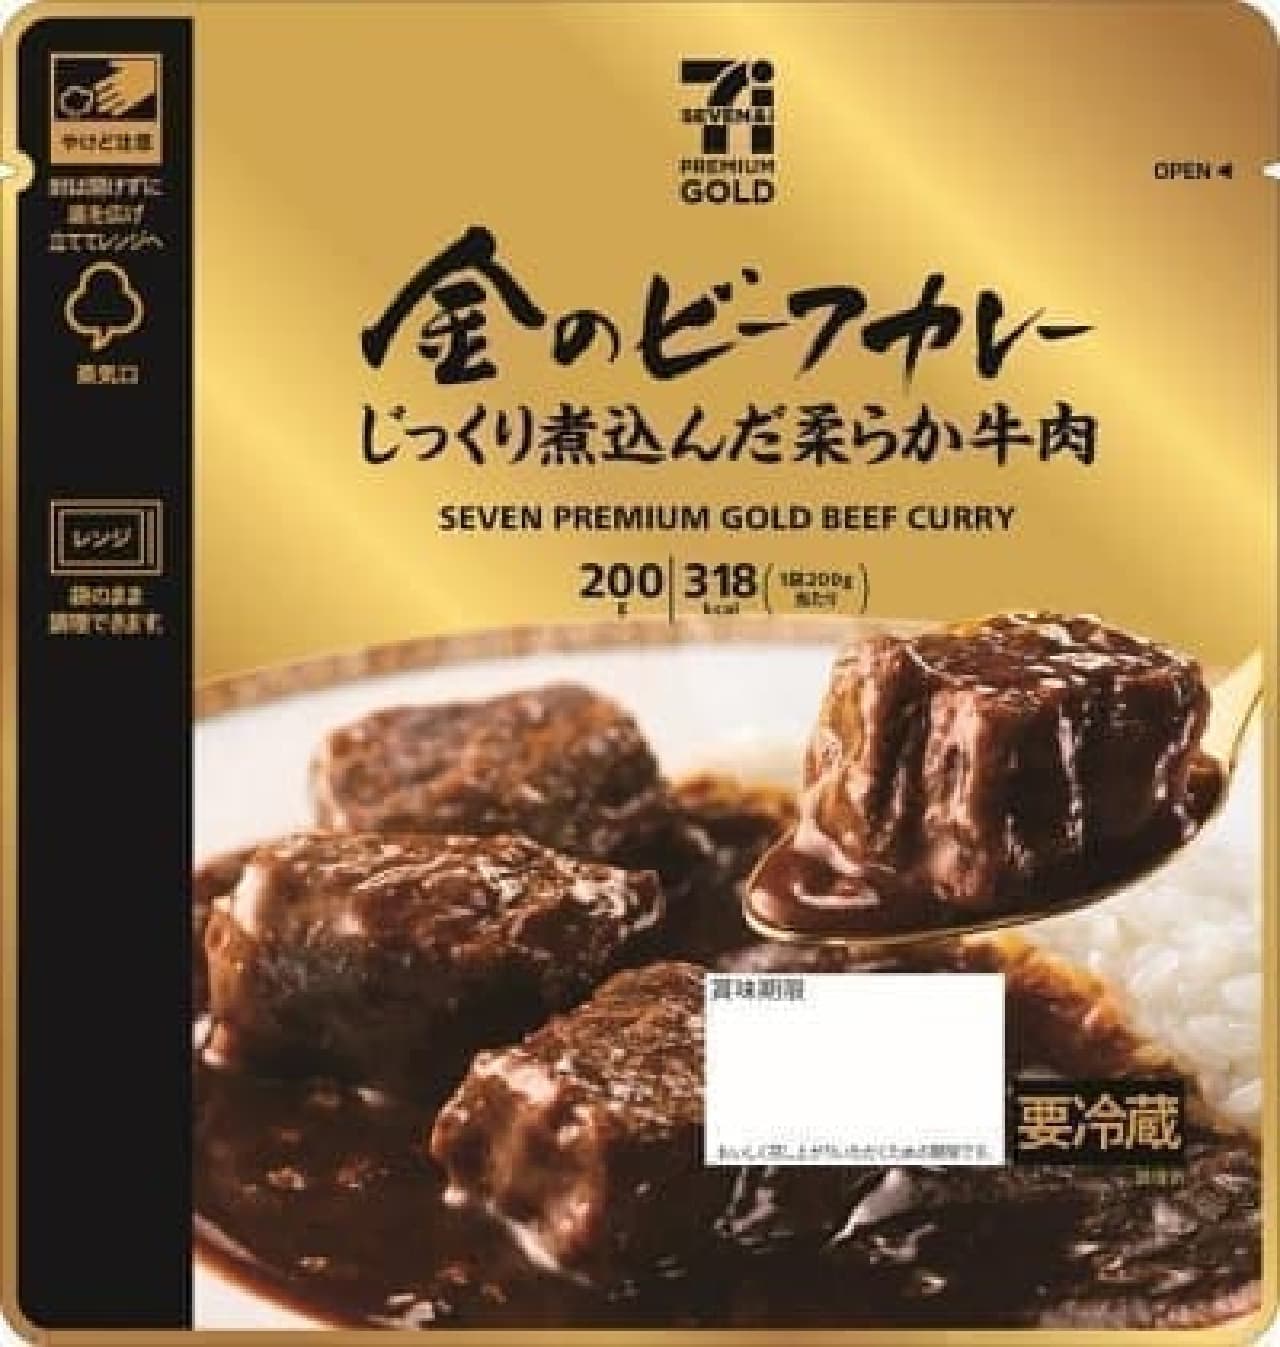 7-ELEVEN Premium Gold Gold Beef Curry